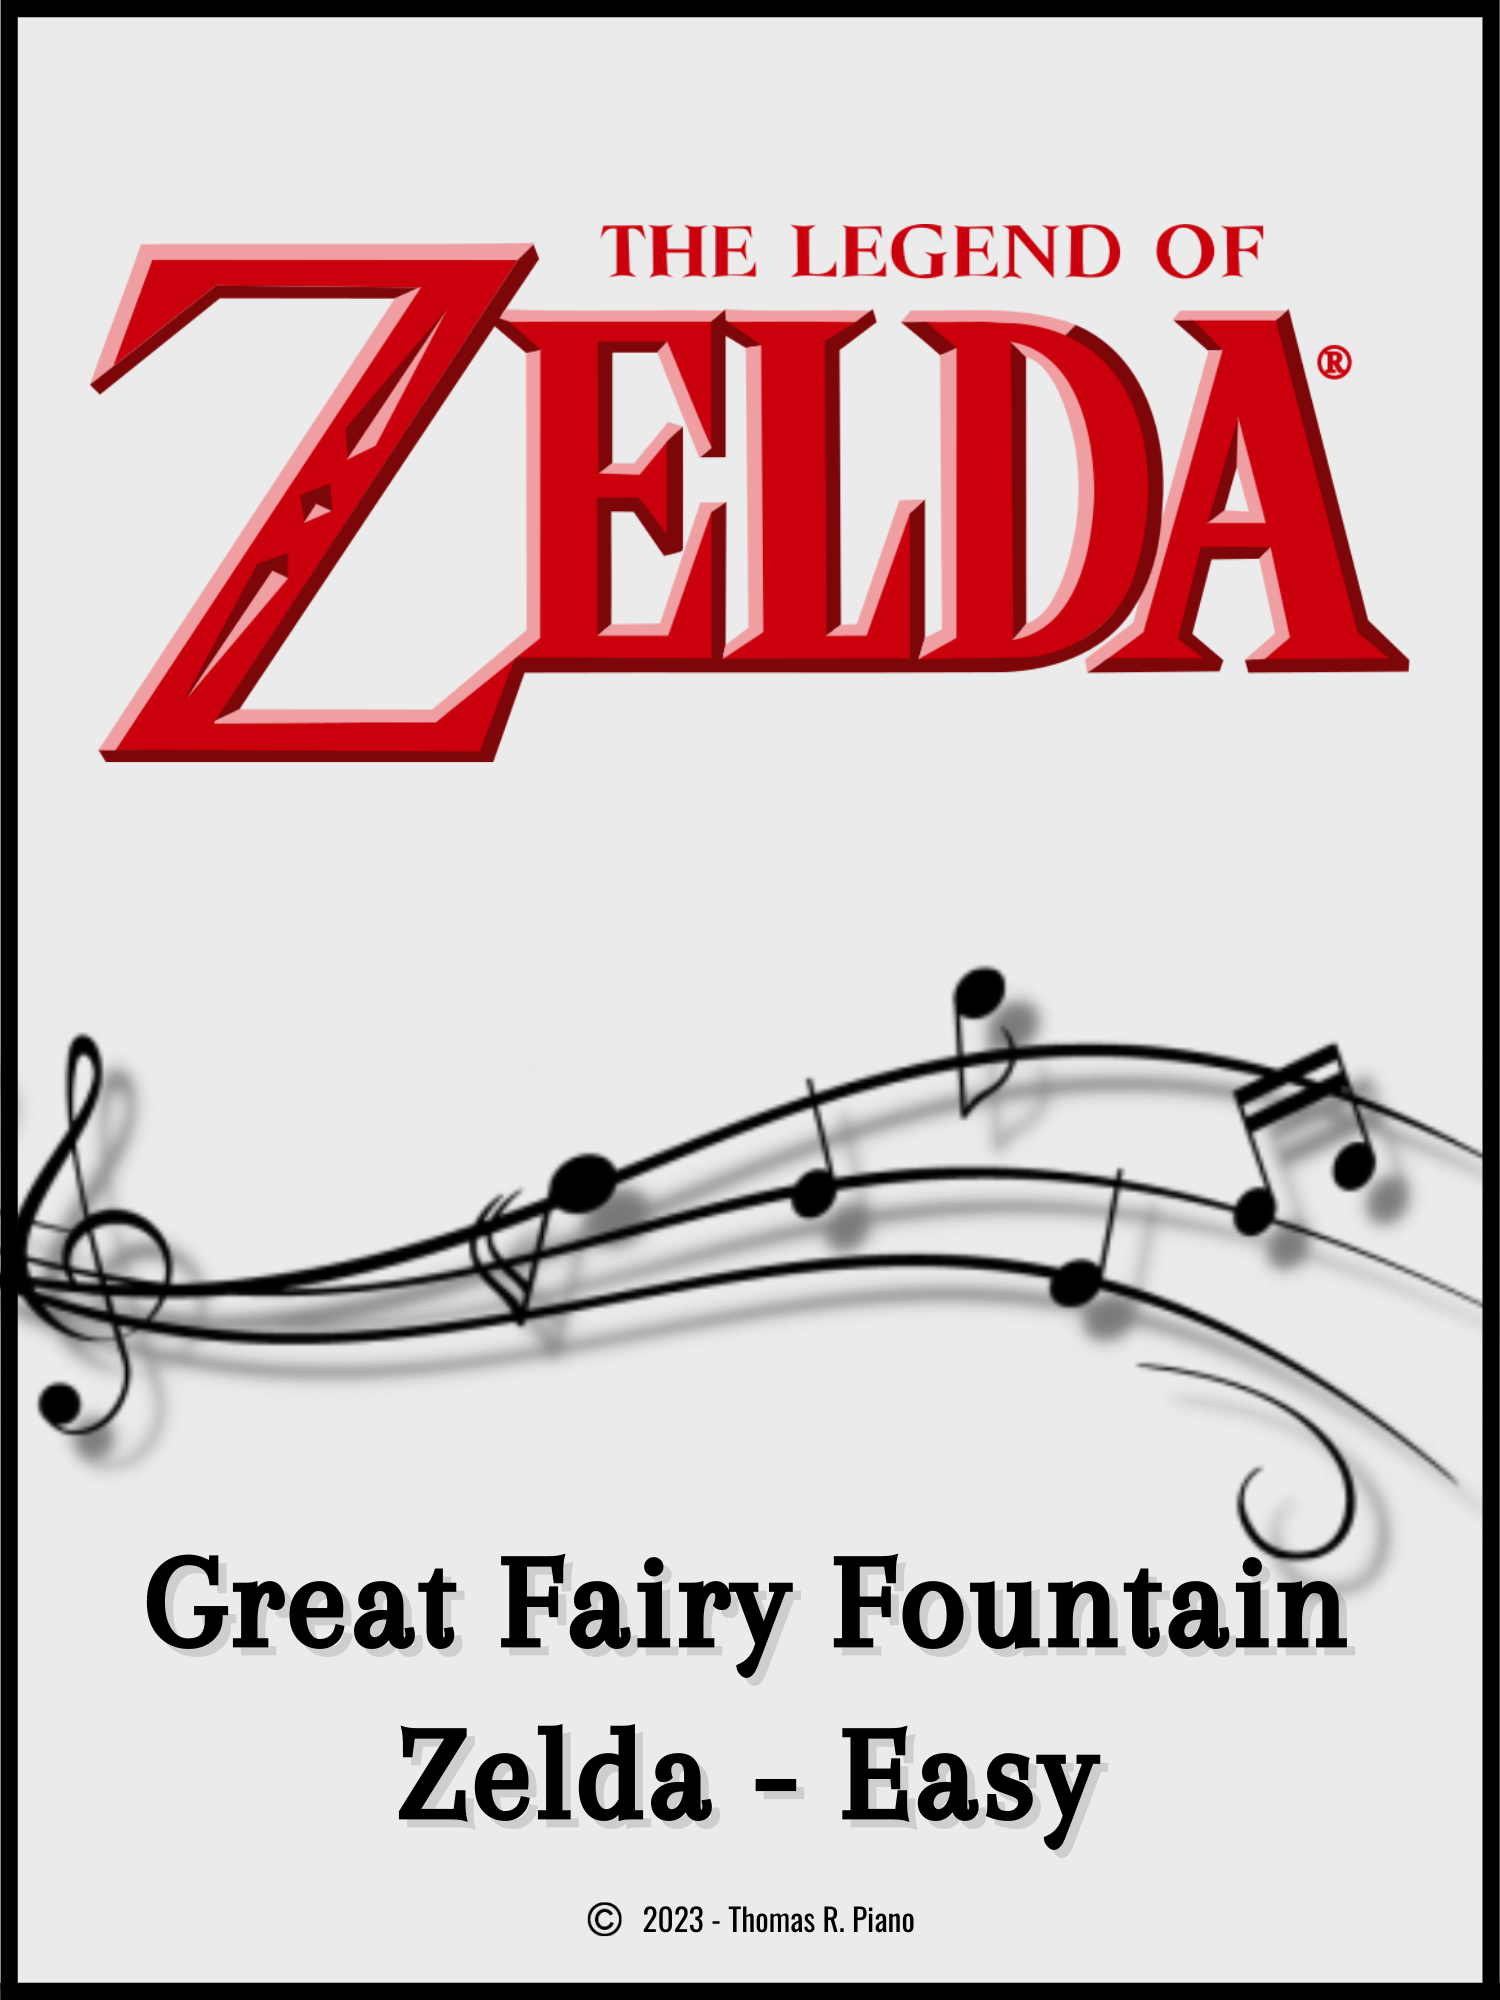 Zelda's Lullaby (The Legend of Zelda: Ocarina of Time) - Easy version sheet  music for Piano downloa…